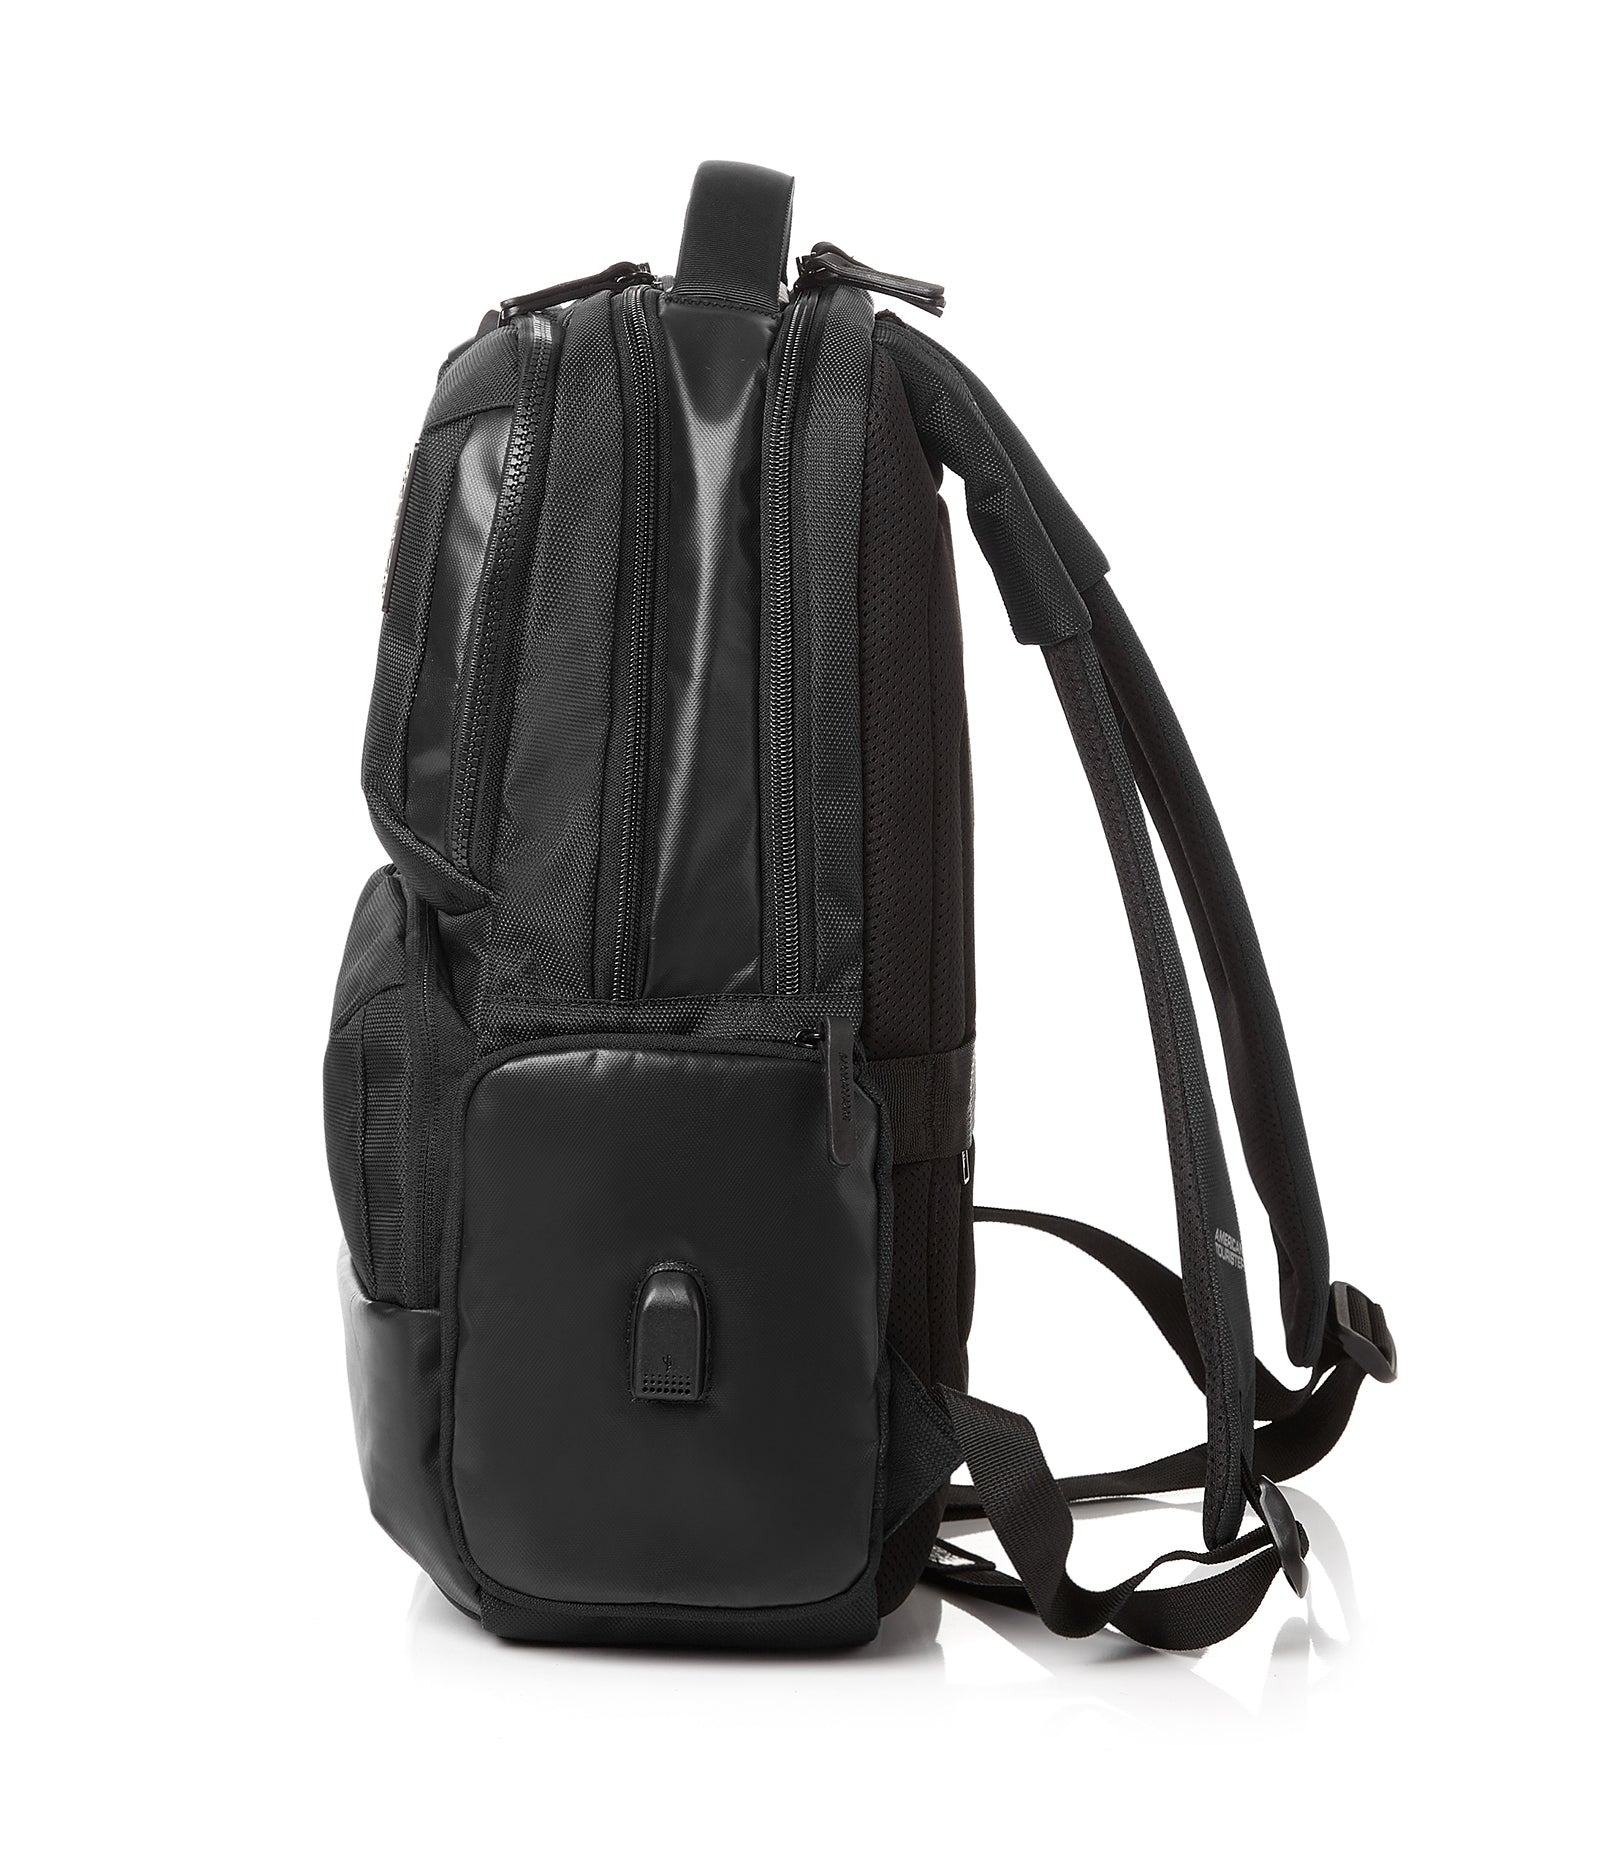 American Tourister - ZORK Backpack 2 AS - Black – Bags To Go